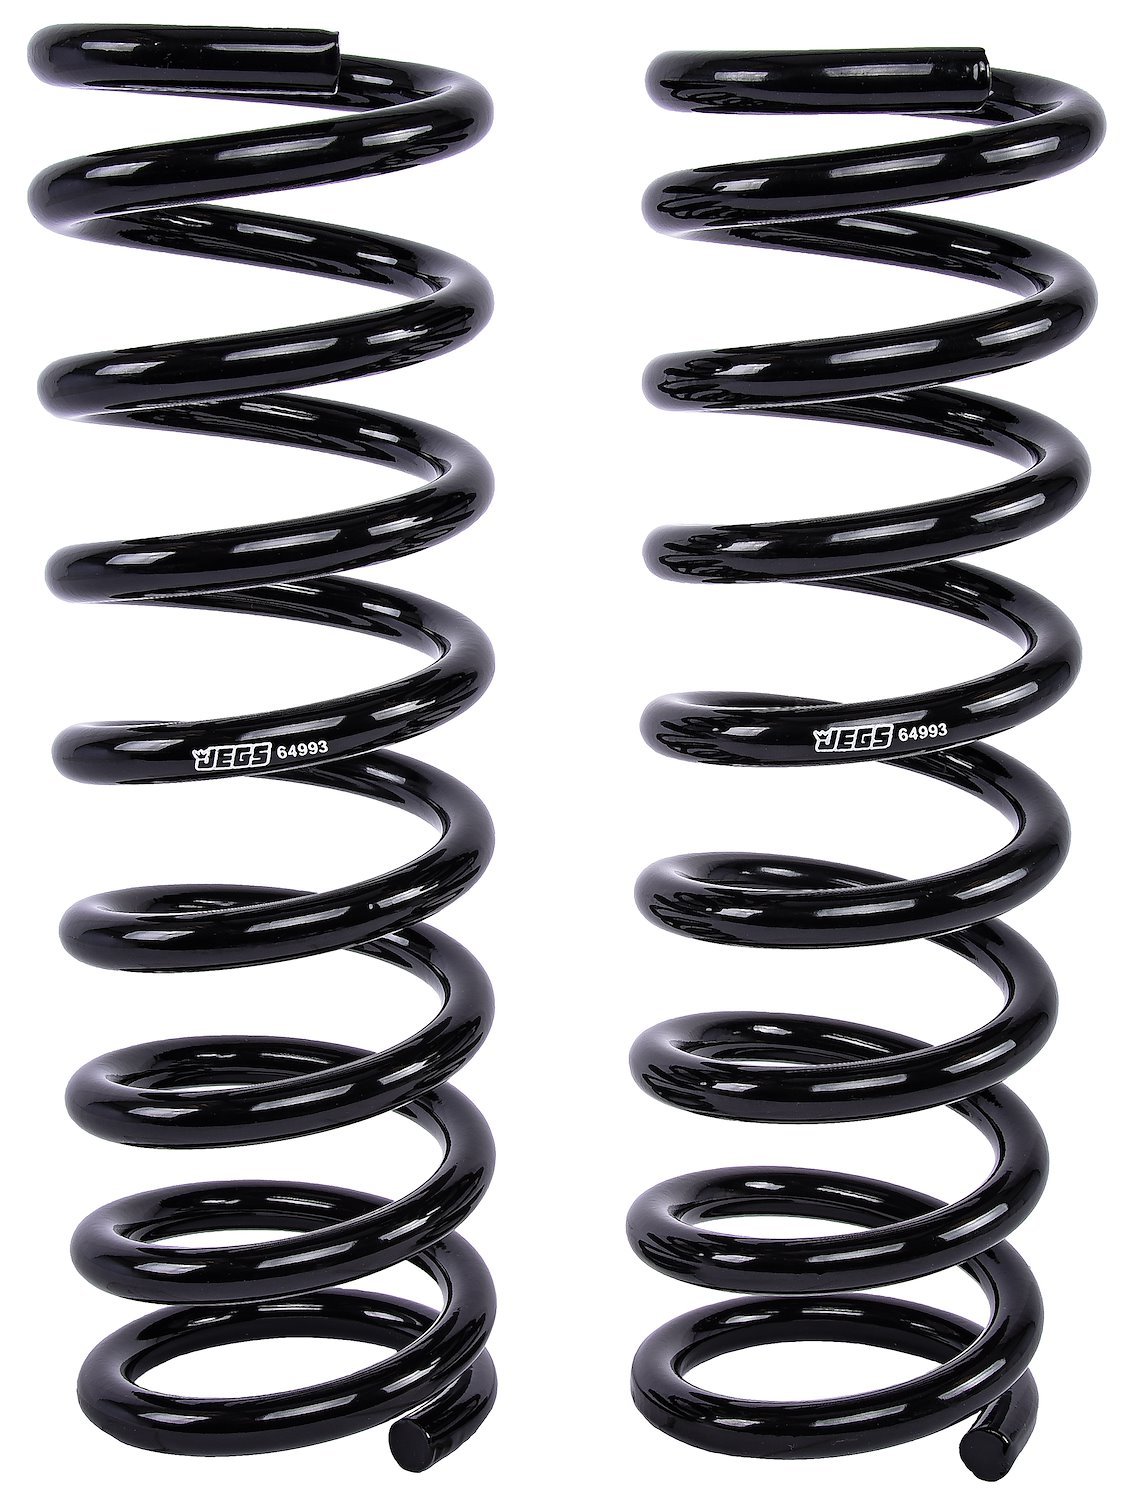 Replacement Front Coil Springs Fits Select 1967-1974 GM Models [16.060 in. Length, 337 lb./in., Black Powder-Coated Finish]